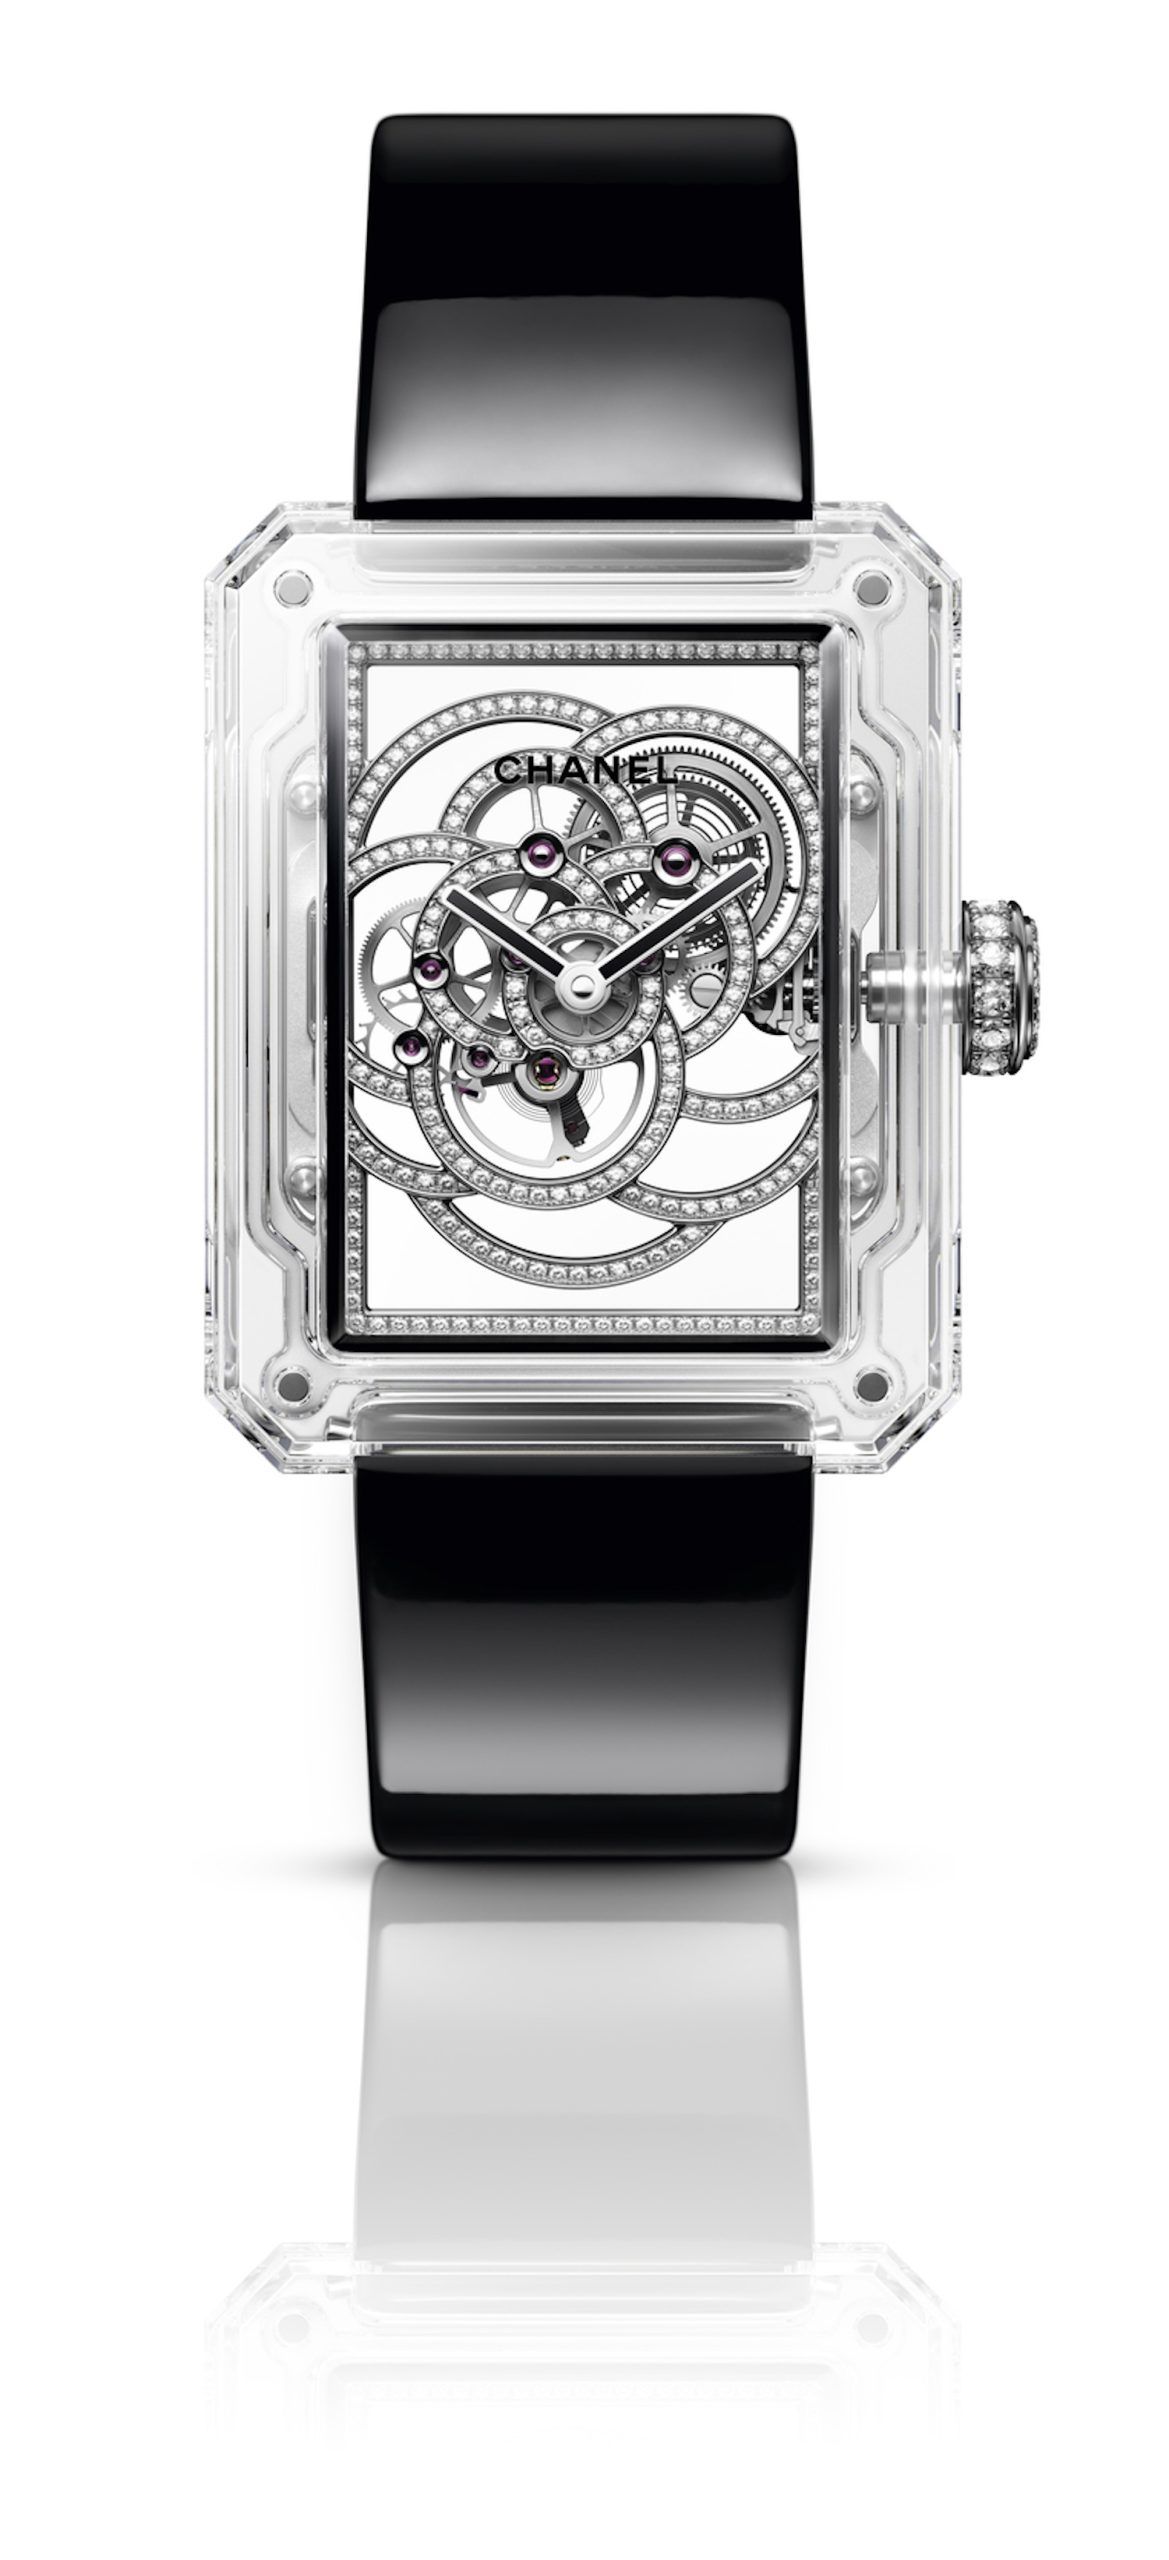 Chanel's watchmaking innovations showcase its commitment to excellence